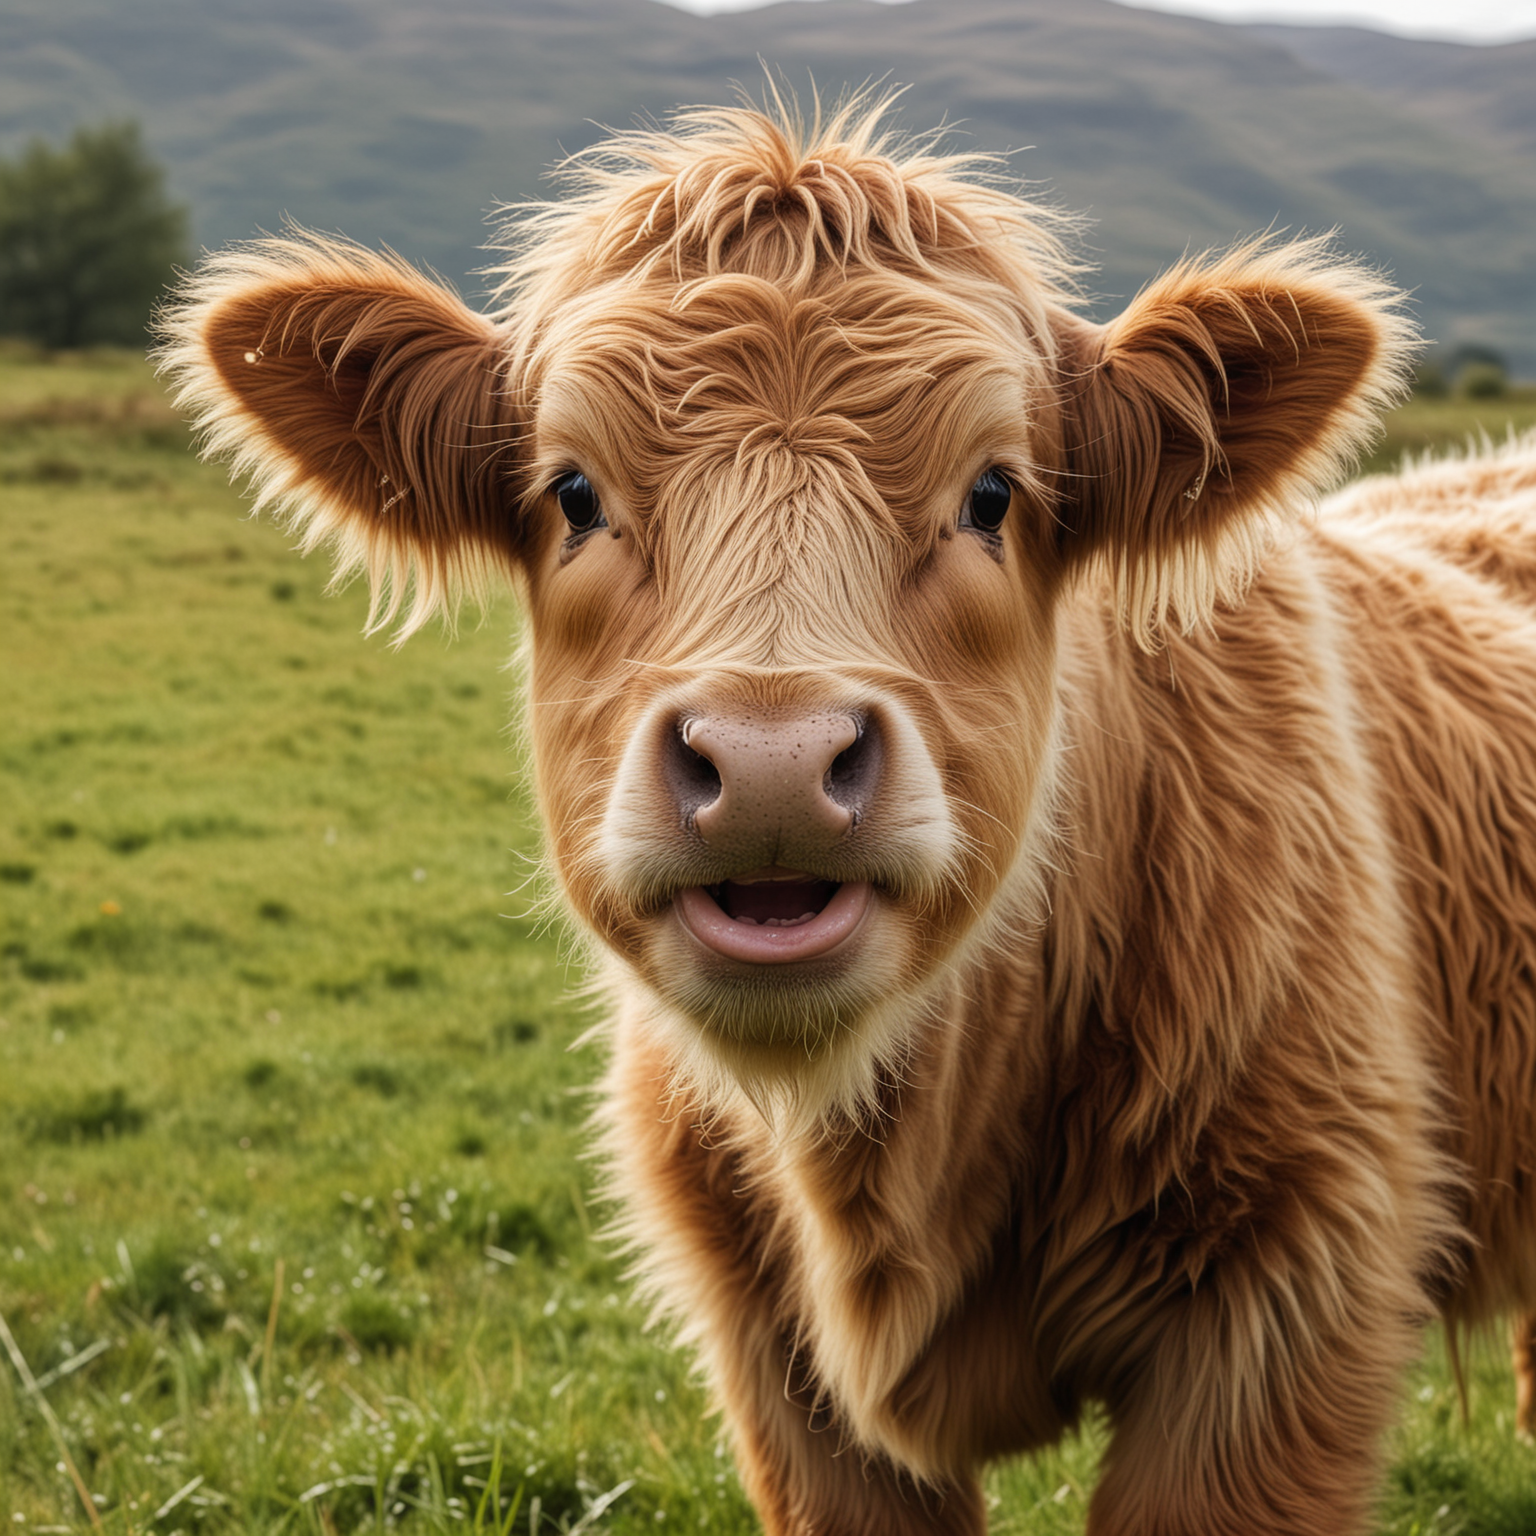 Adorable Laughing Highland Baby Cow Closeup in Lush Grass Field